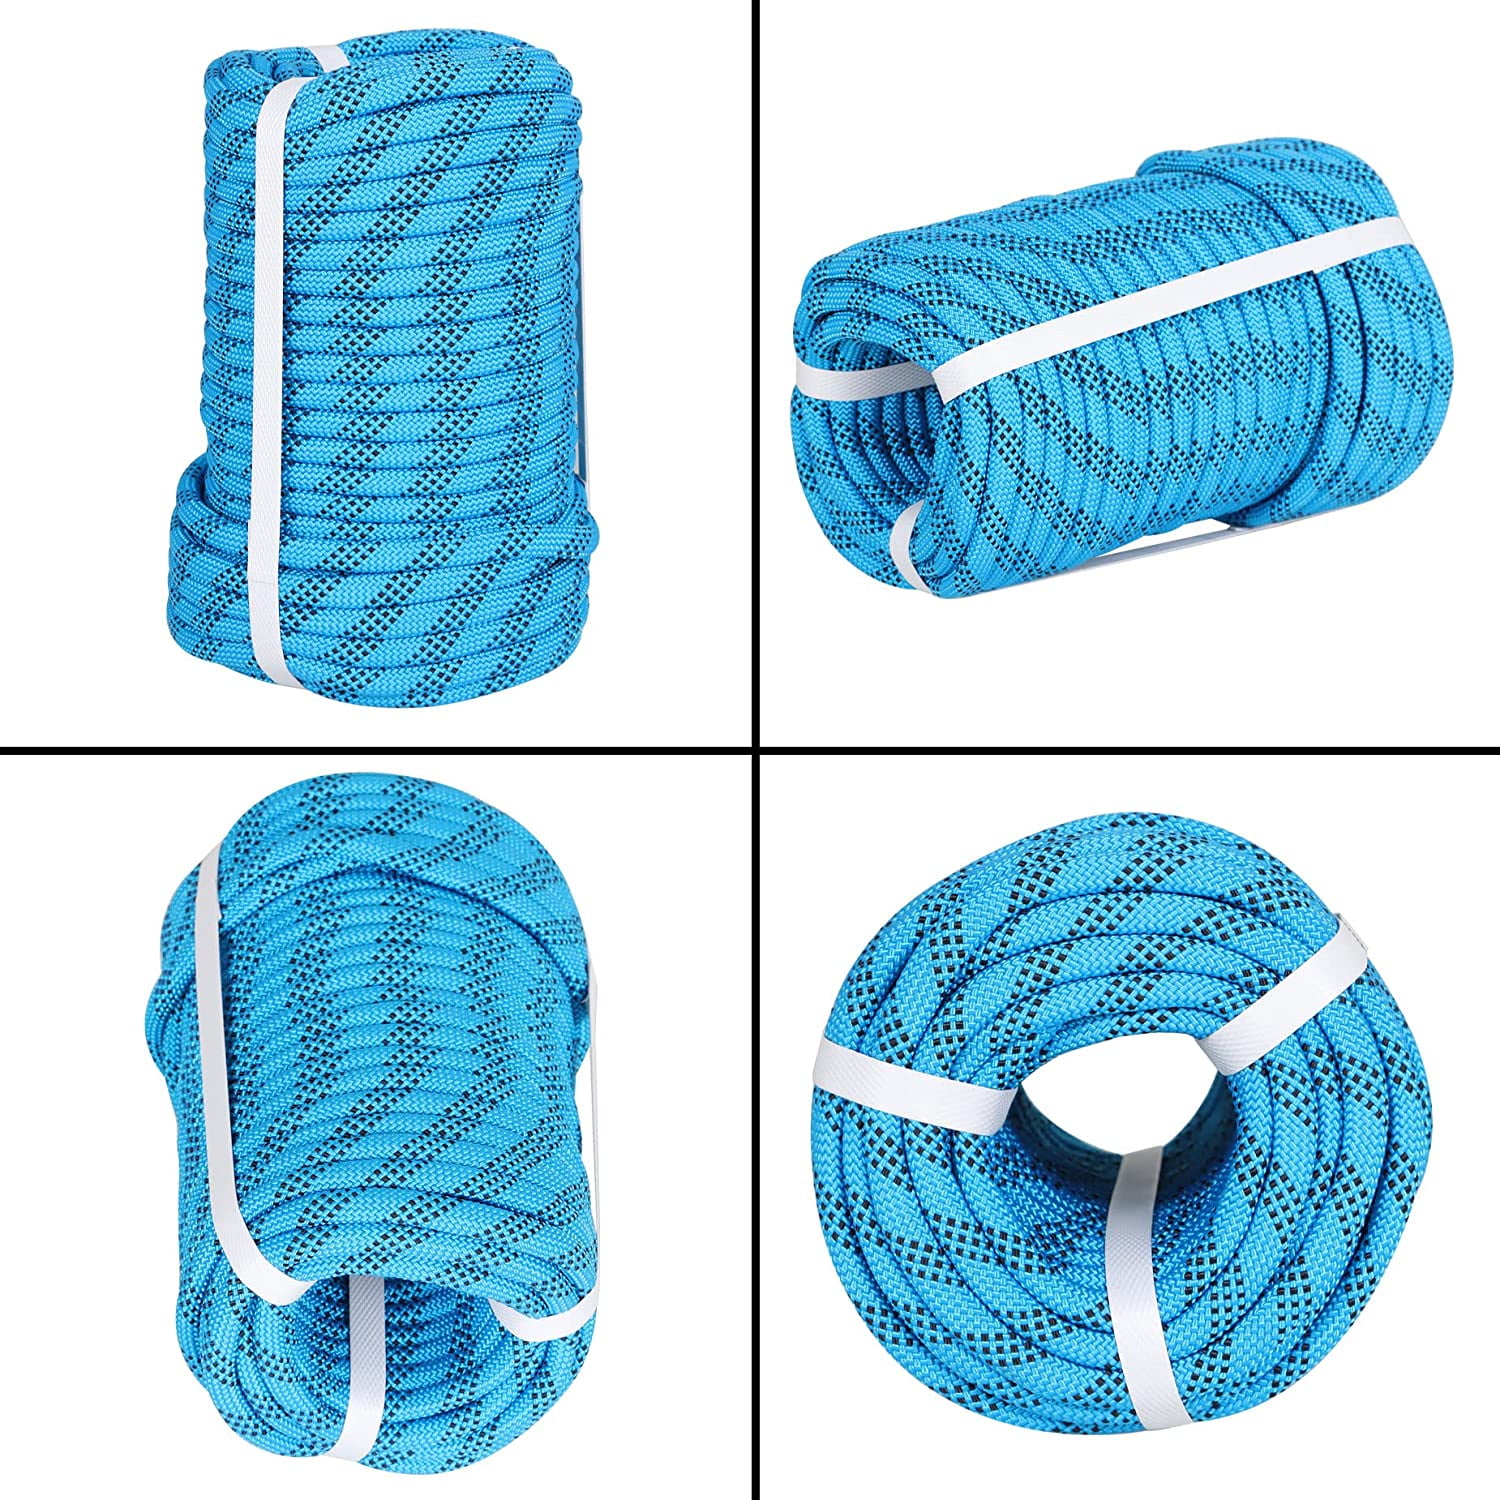 Amgate Wire Center Flagpole Rope 5/16 x 100 feet - Braided Polyester Line  with 